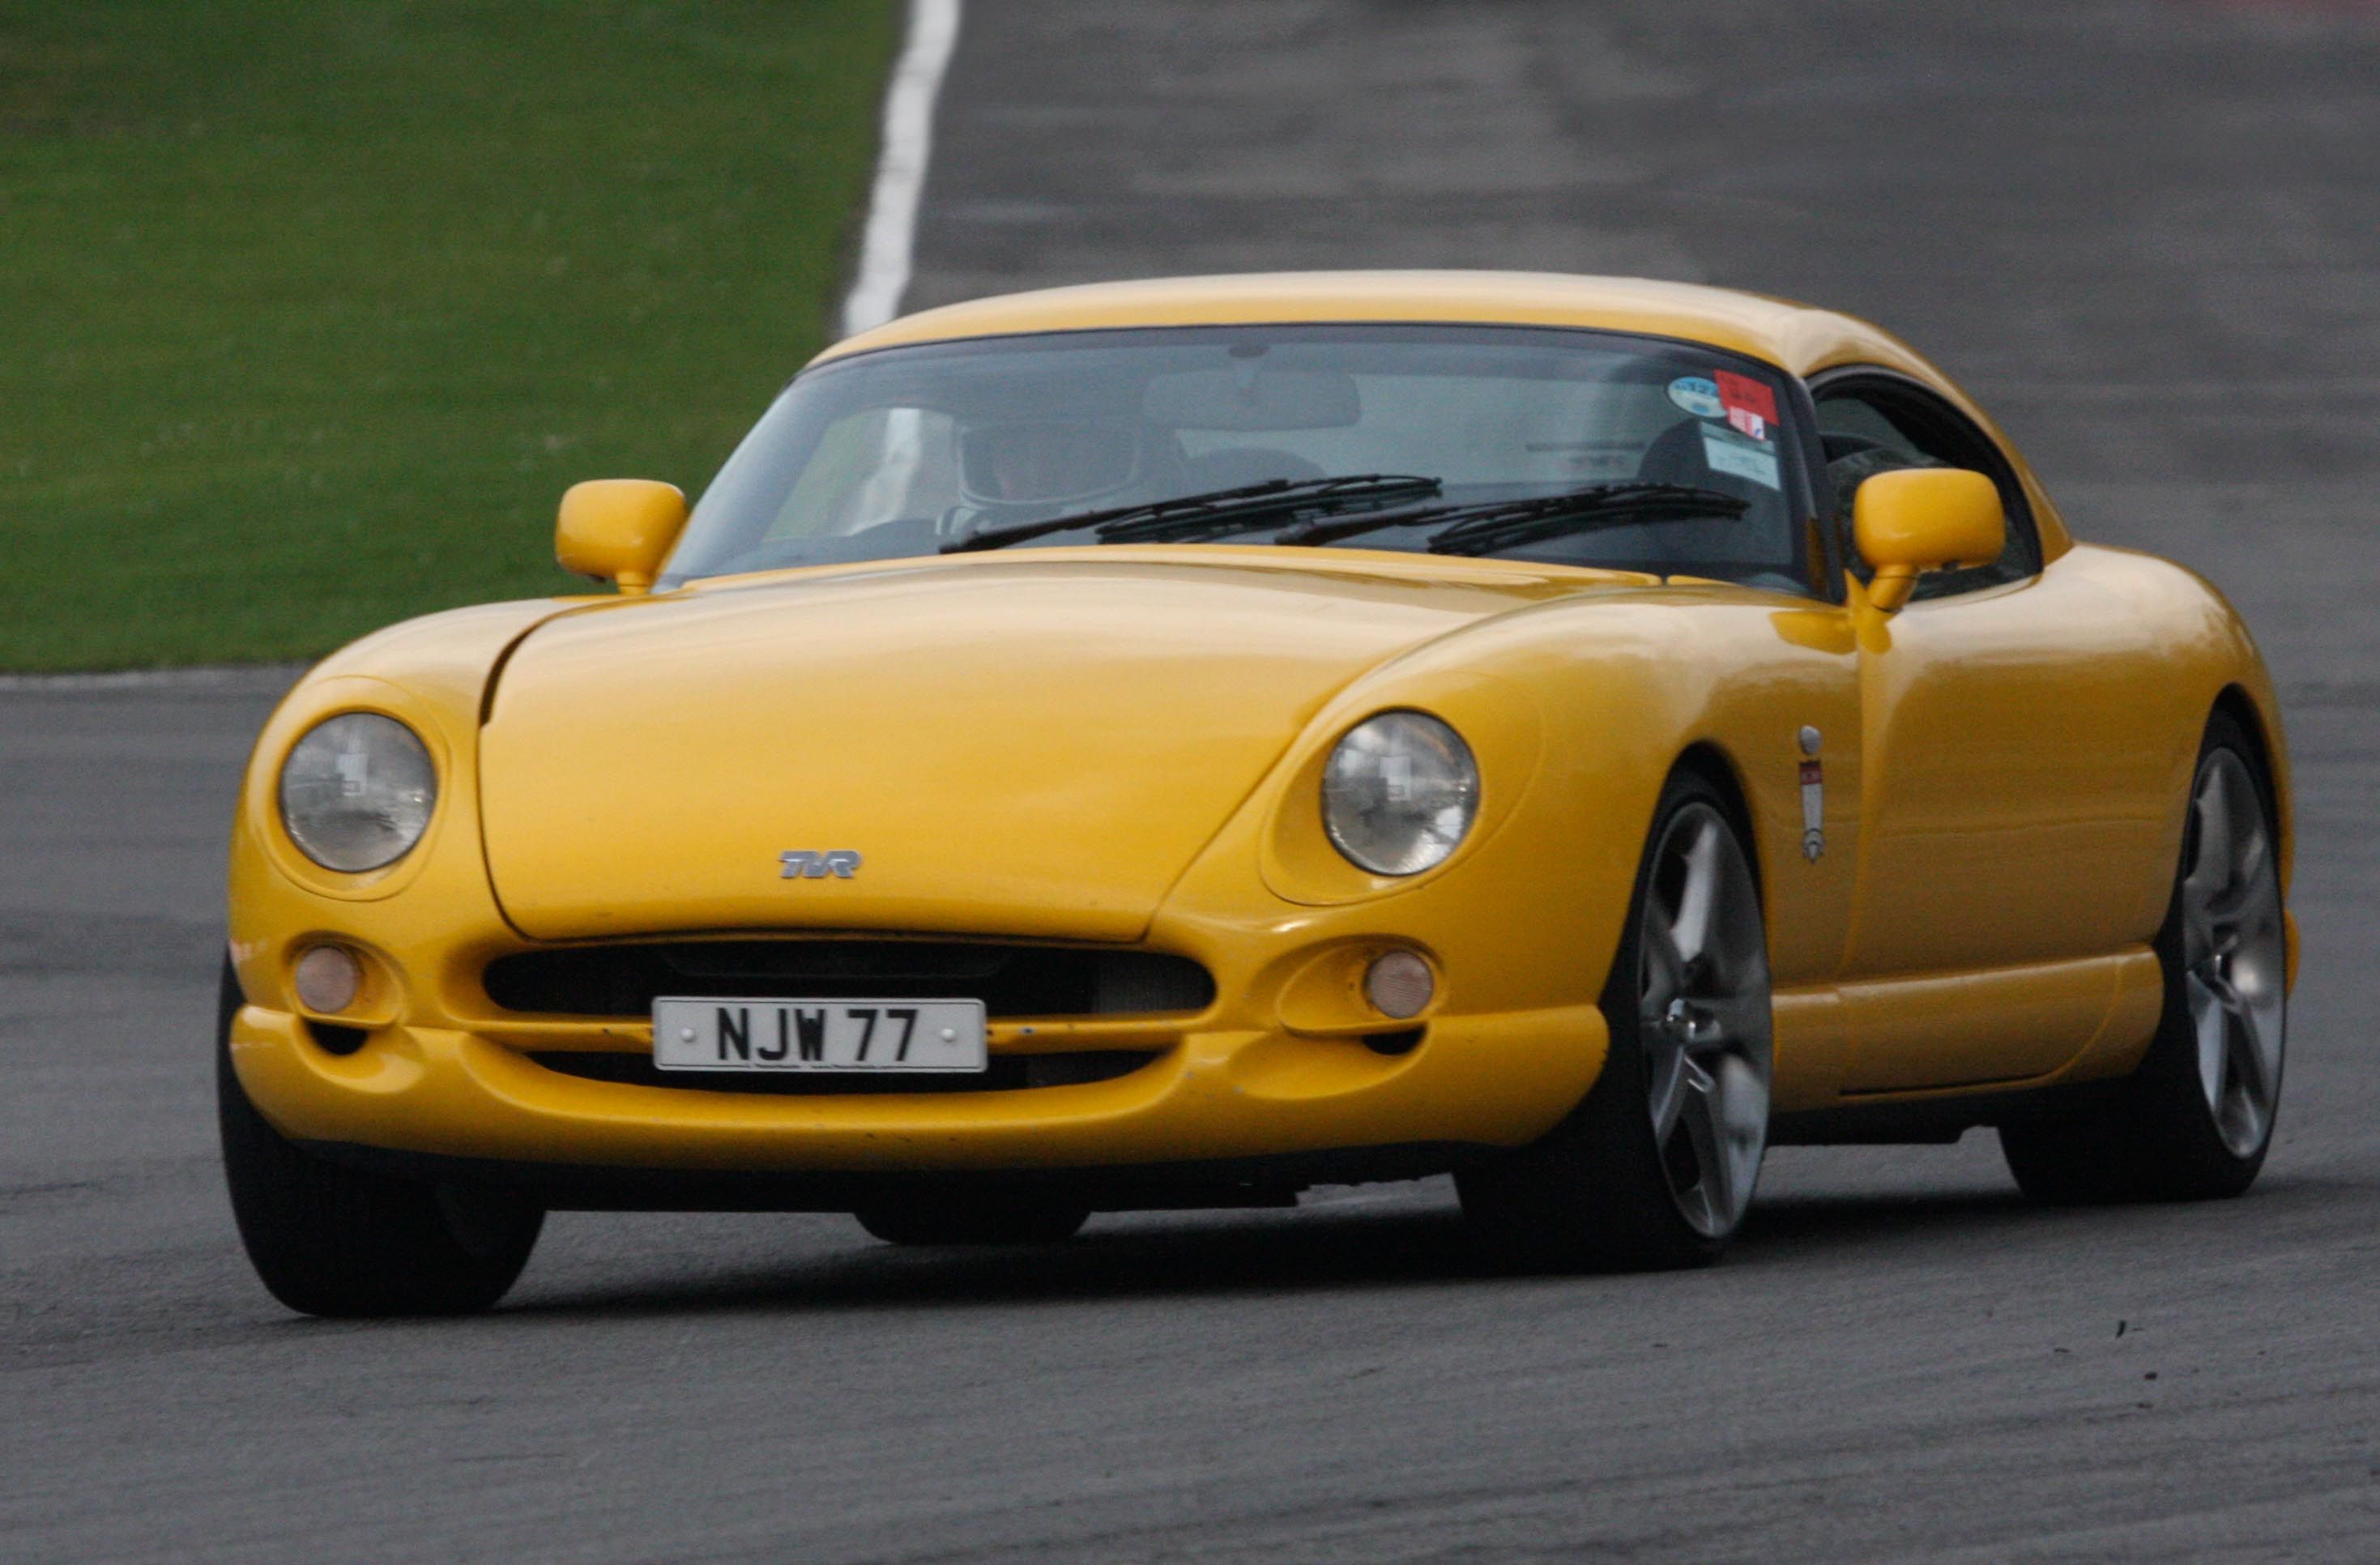 The TVR V8